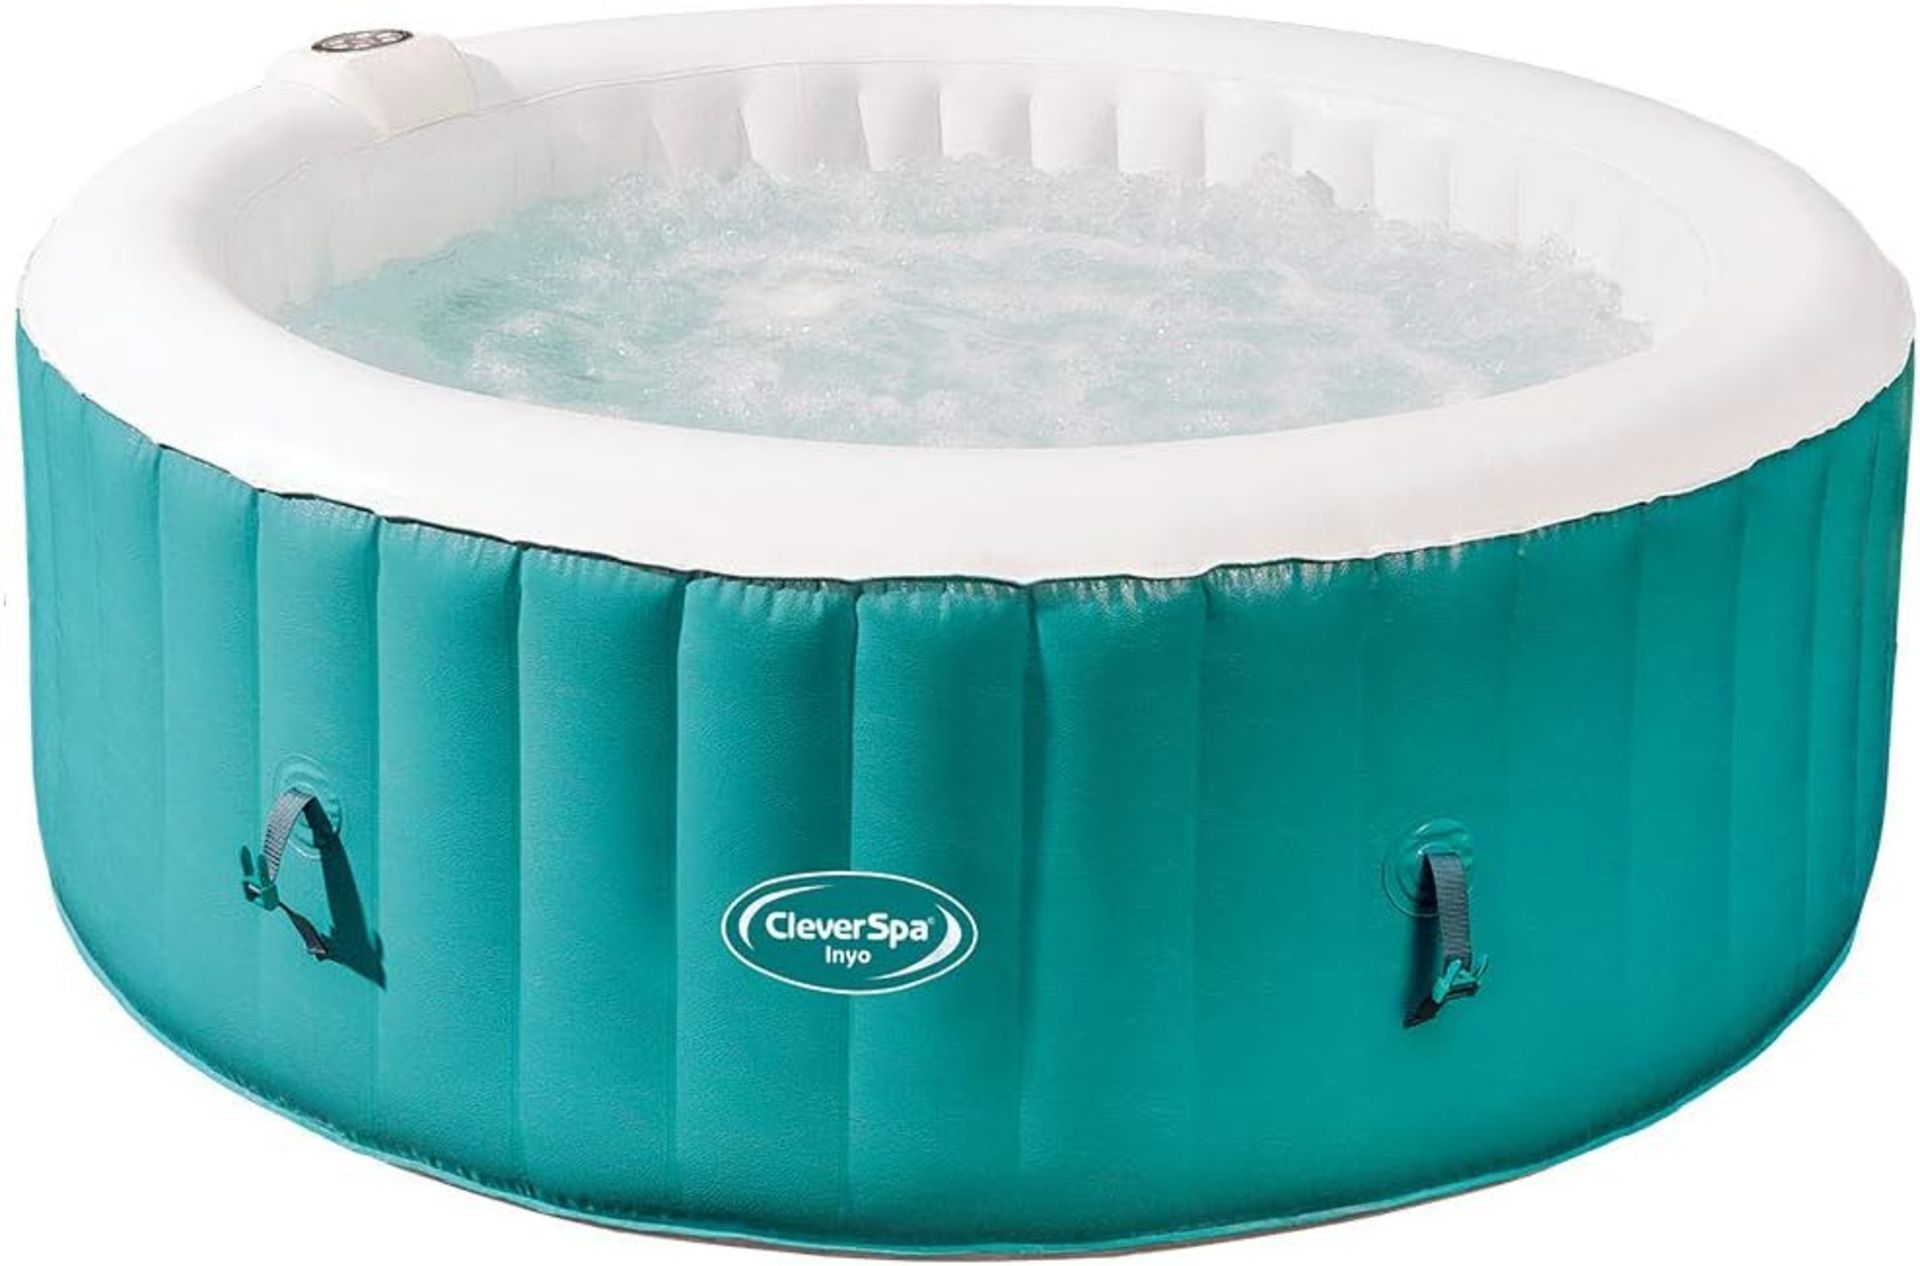 Pallet to Contain 8 x New & Boxed CleverSpa Inyo 4 Person Hot Tub. RRP £499.99 each. There is no - Image 3 of 5